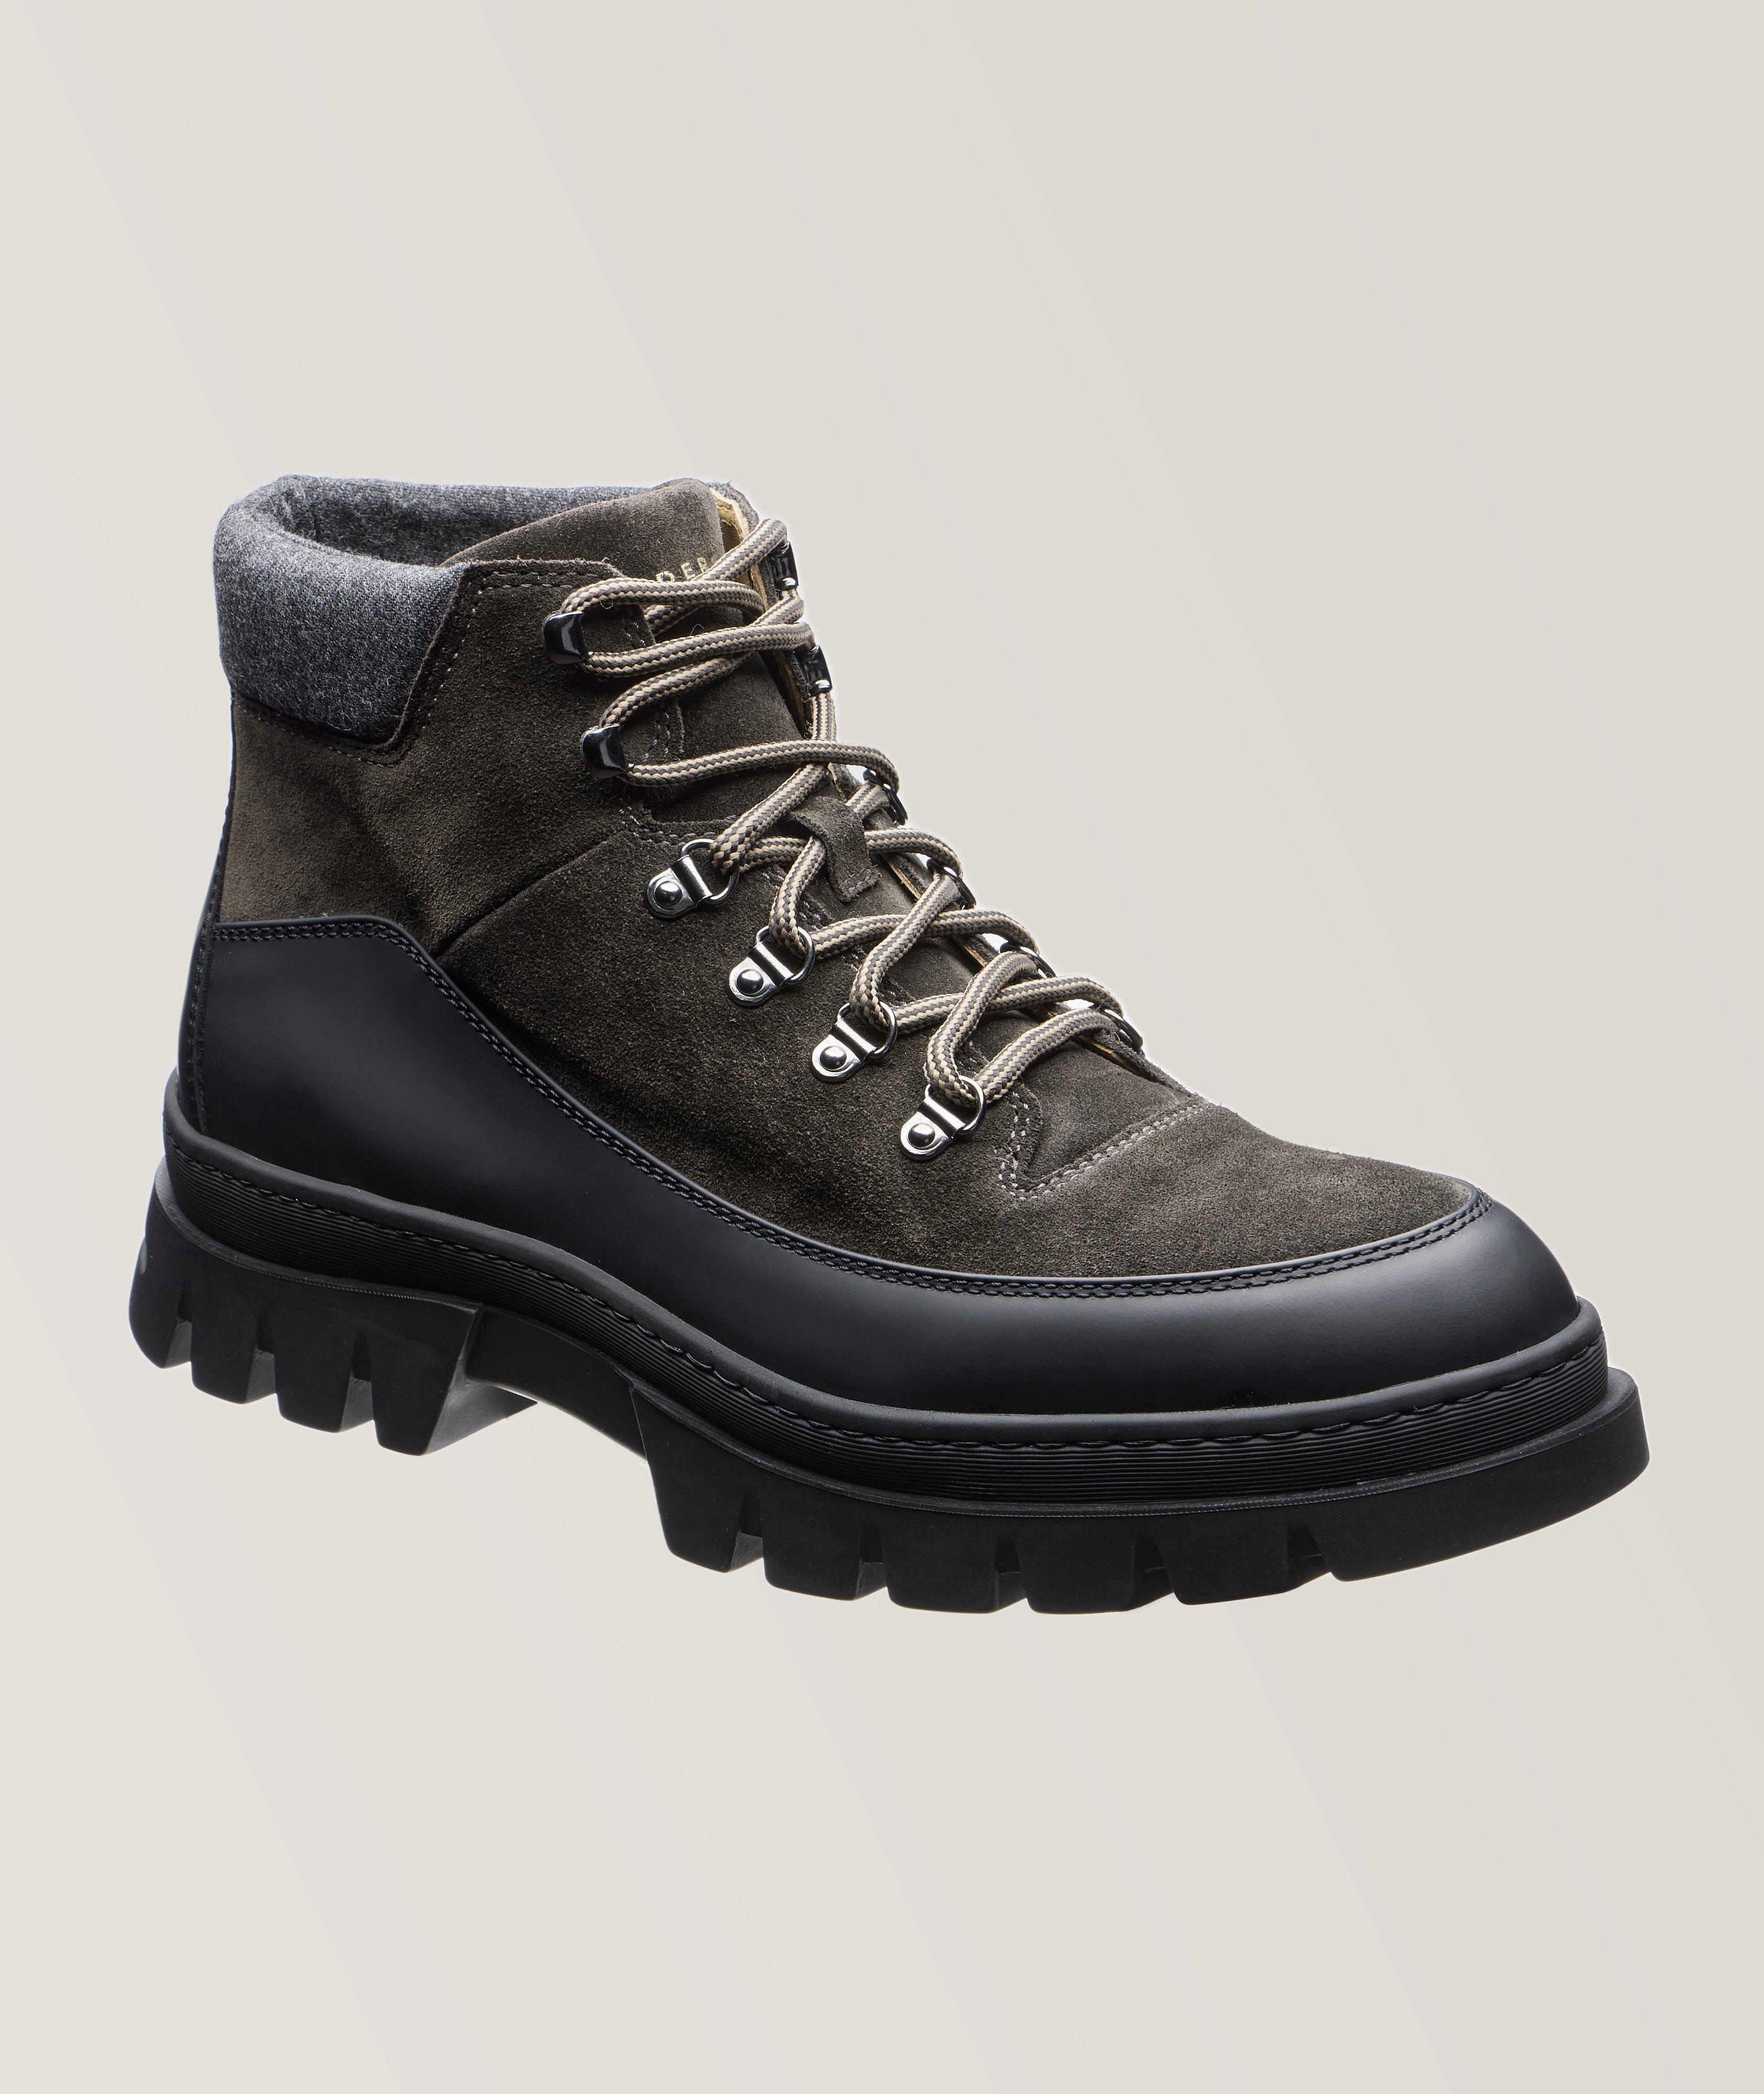 Suede Lace-Up Hiking Boots image 0